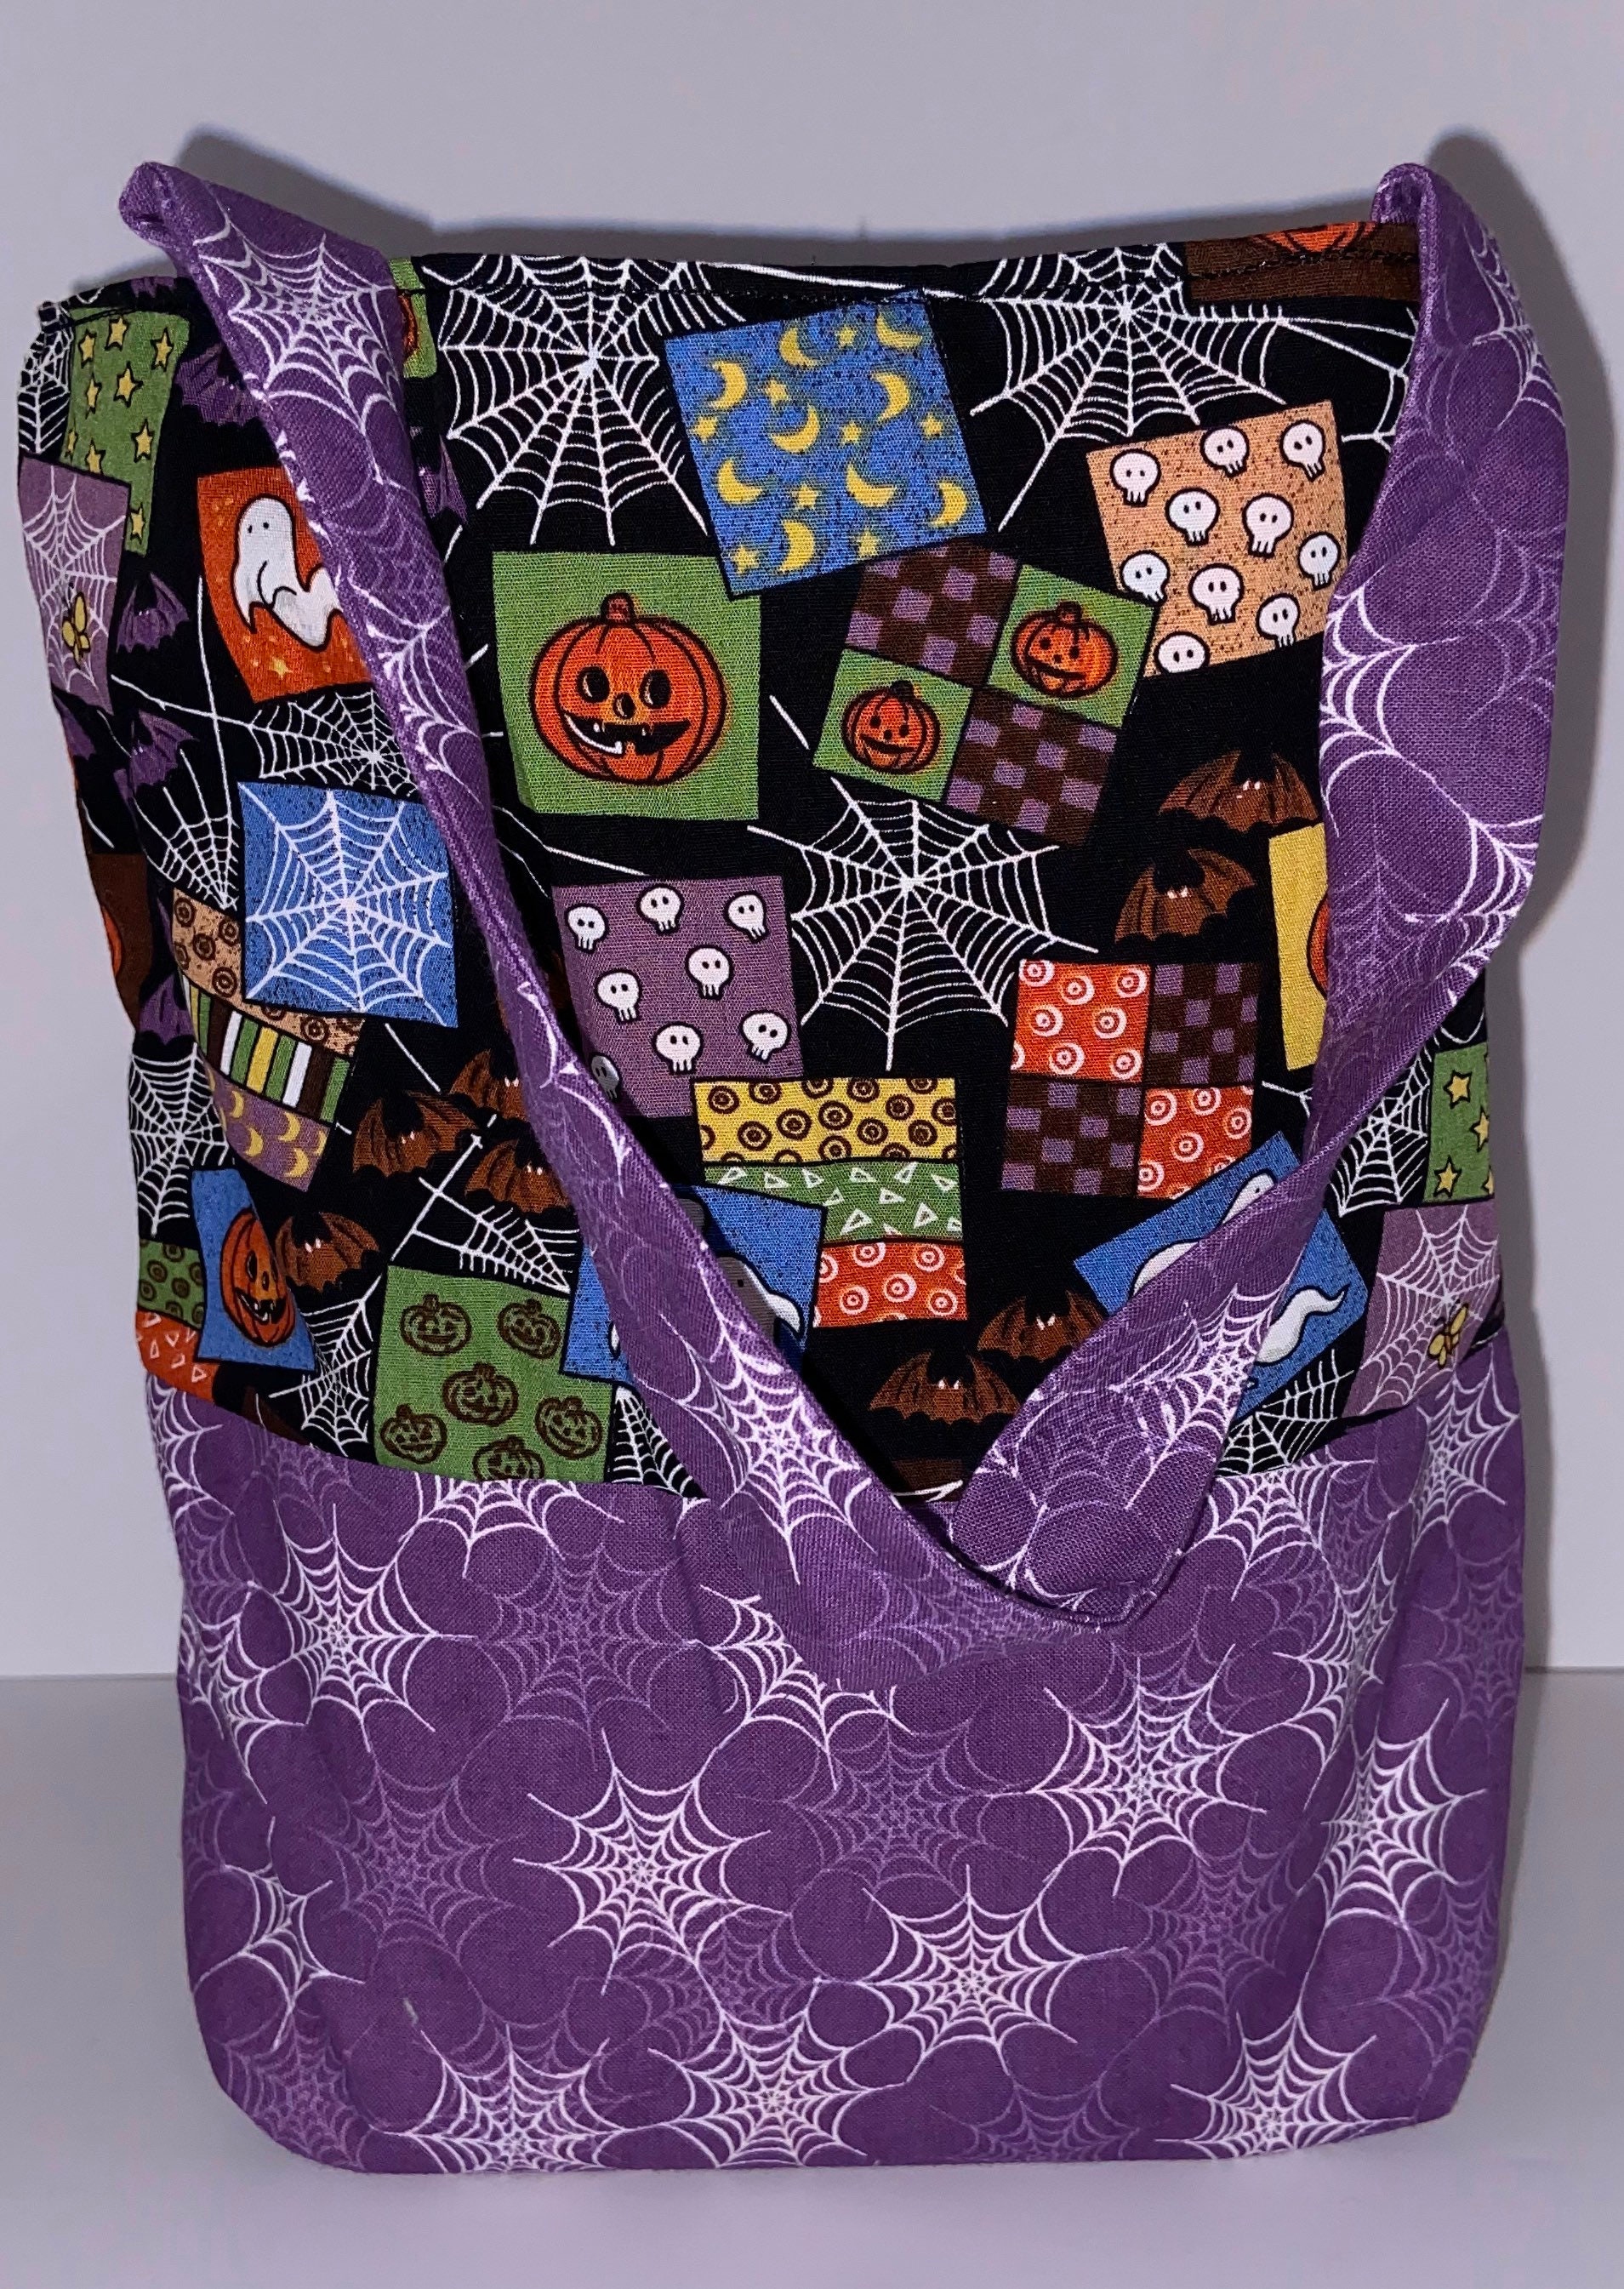  EMBRUNIOICE Halloween Trick or Treat Bags, Reversible